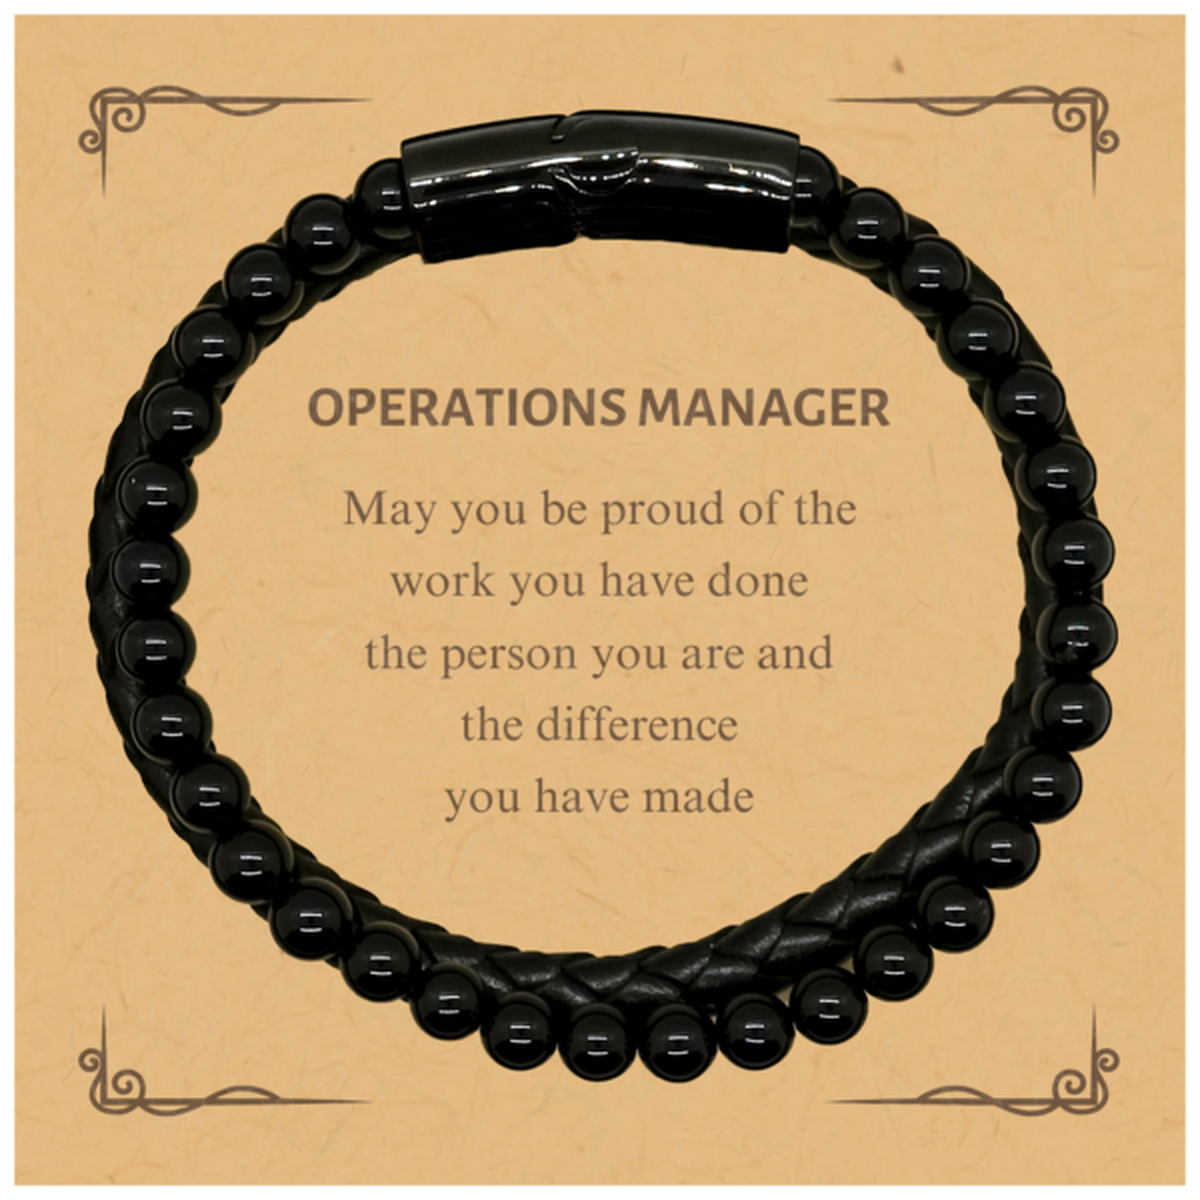 Operations Manager May you be proud of the work you have done, Retirement Operations Manager Stone Leather Bracelets for Colleague Appreciation Gifts Amazing for Operations Manager